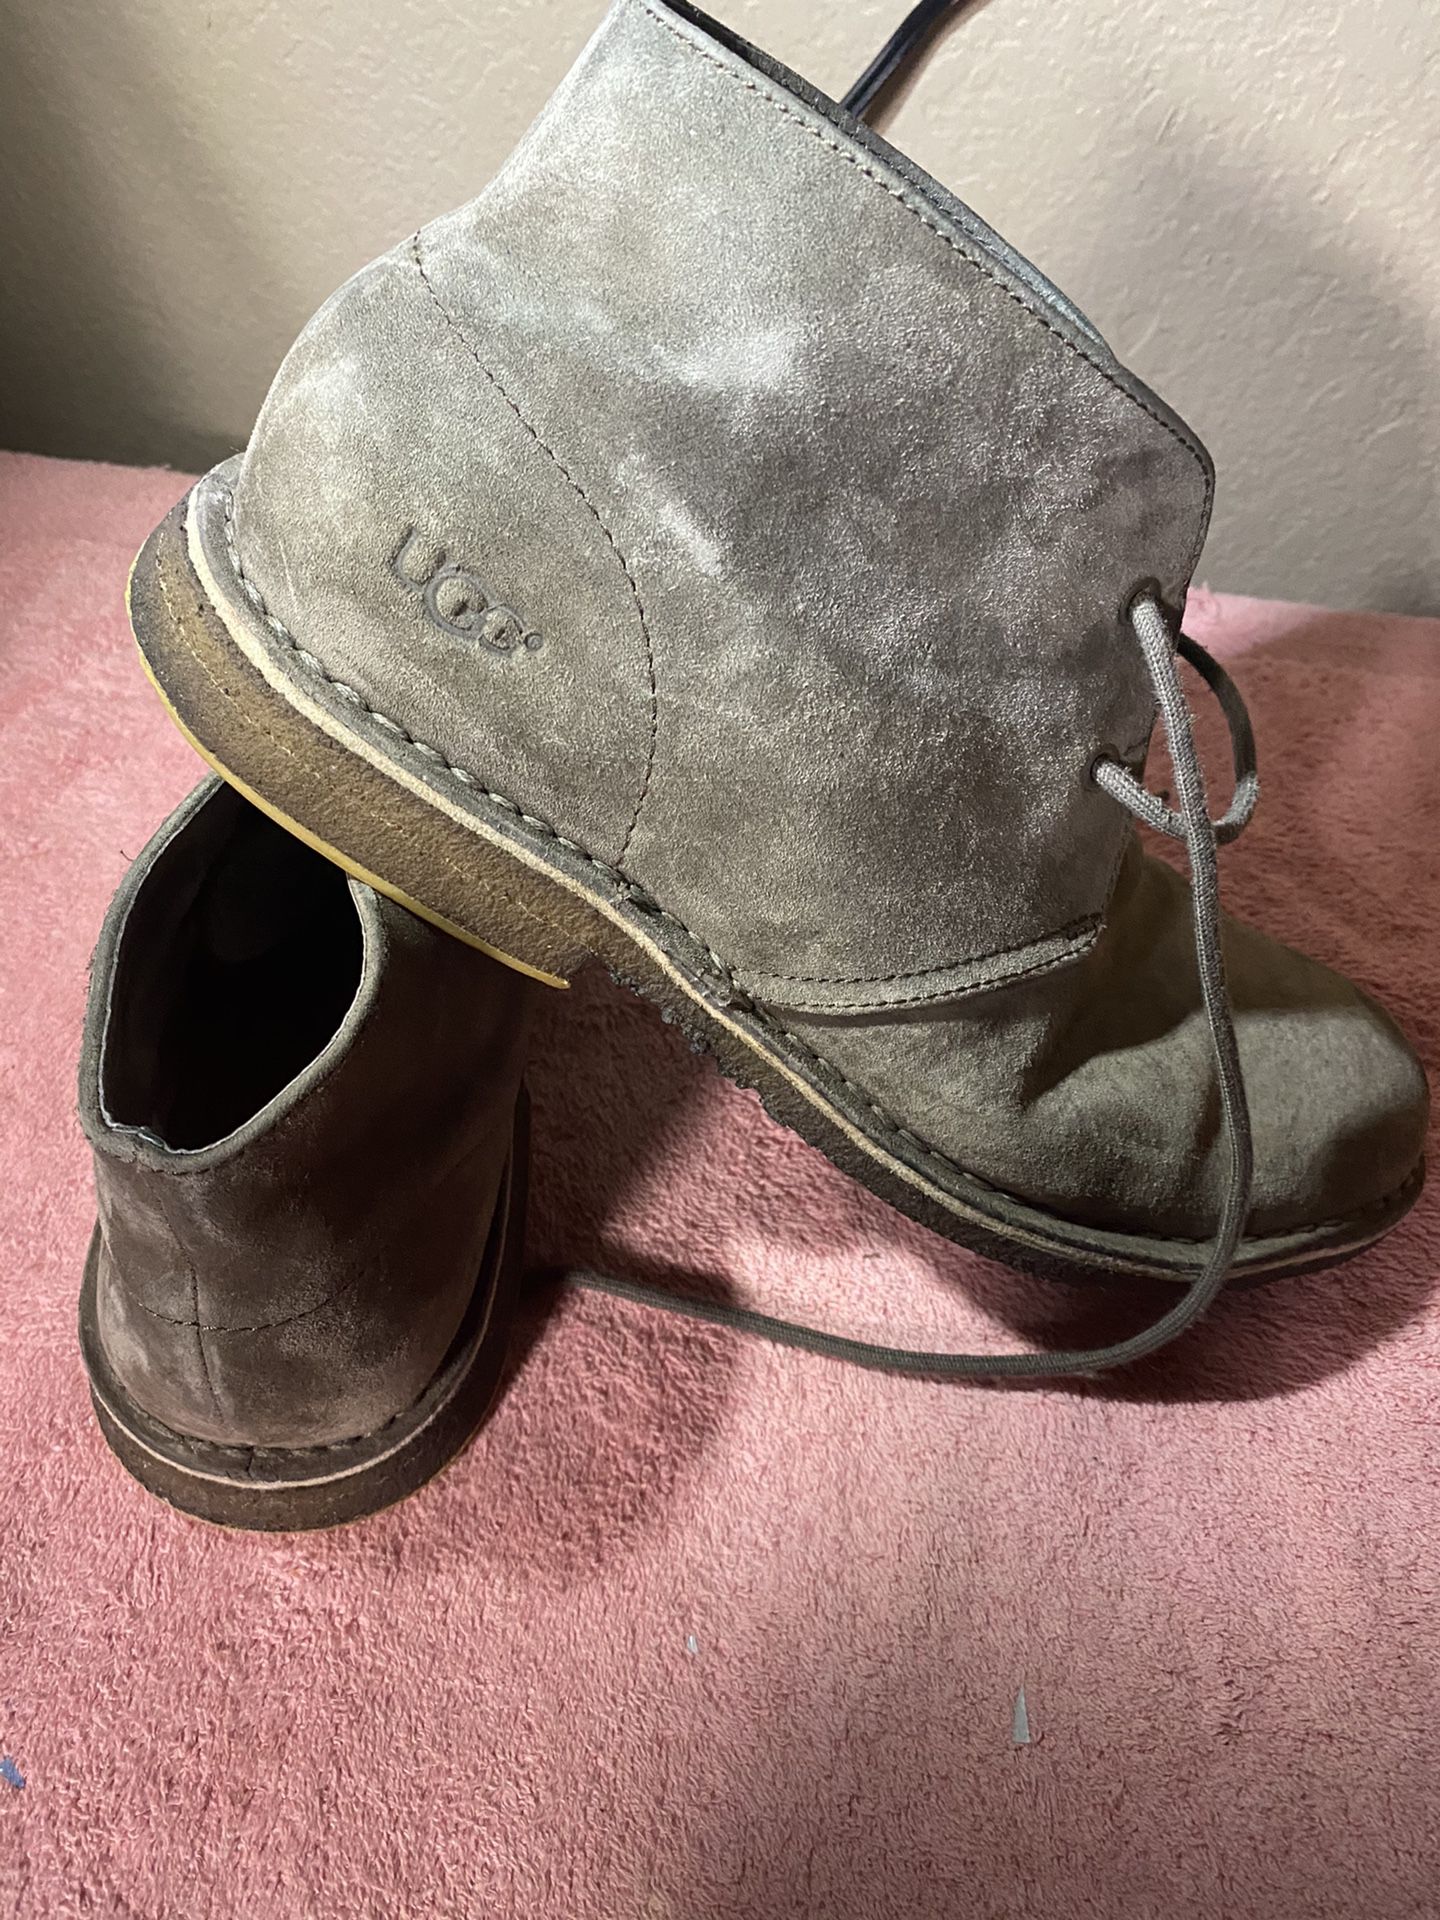 UGG men boots size 10.5 great condition excellent brand